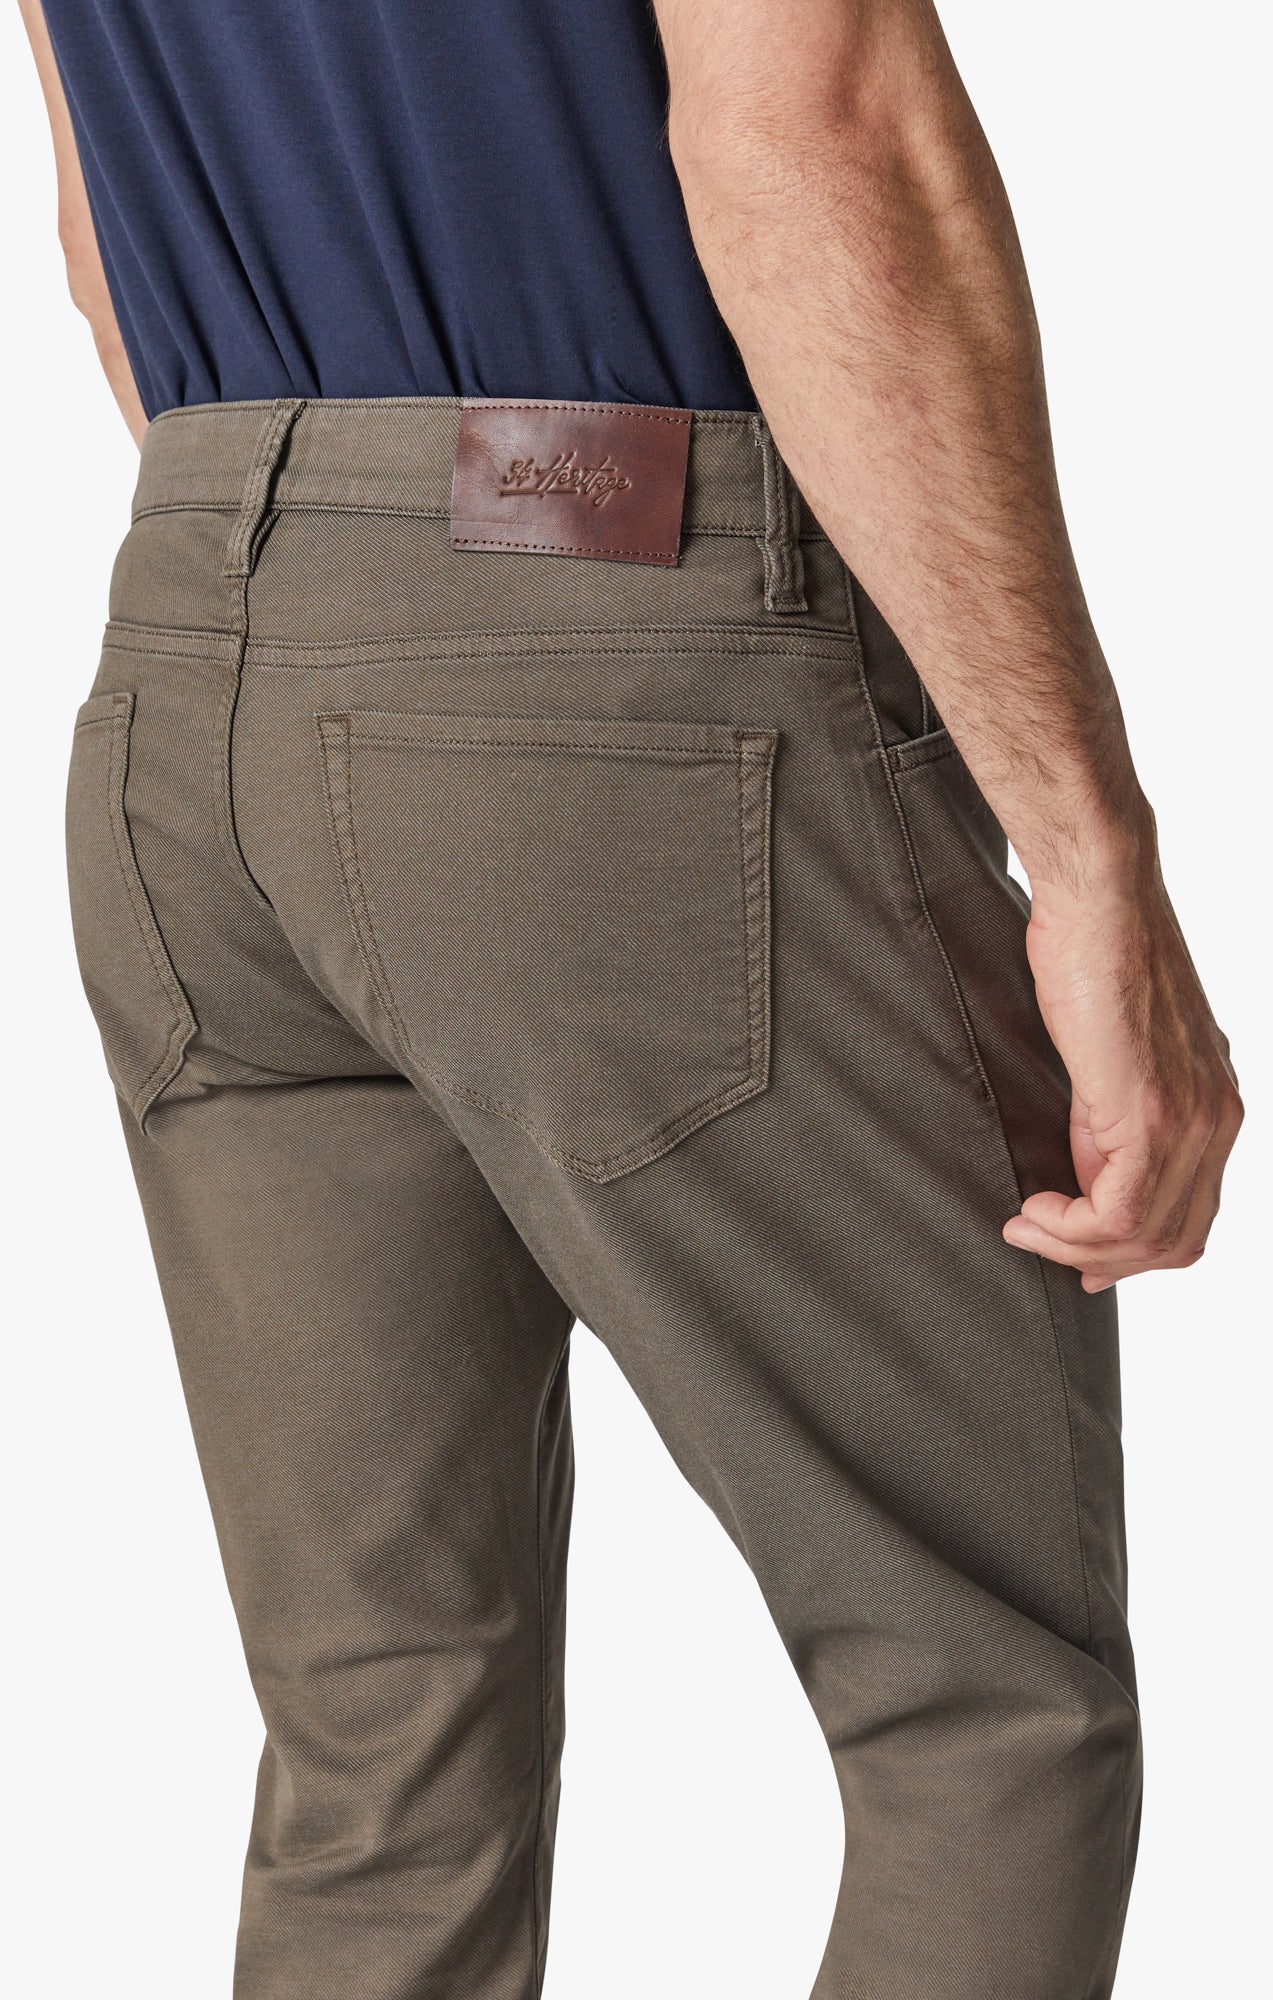 Courage Straight Leg Pants in Canteen Coolmax Image 5